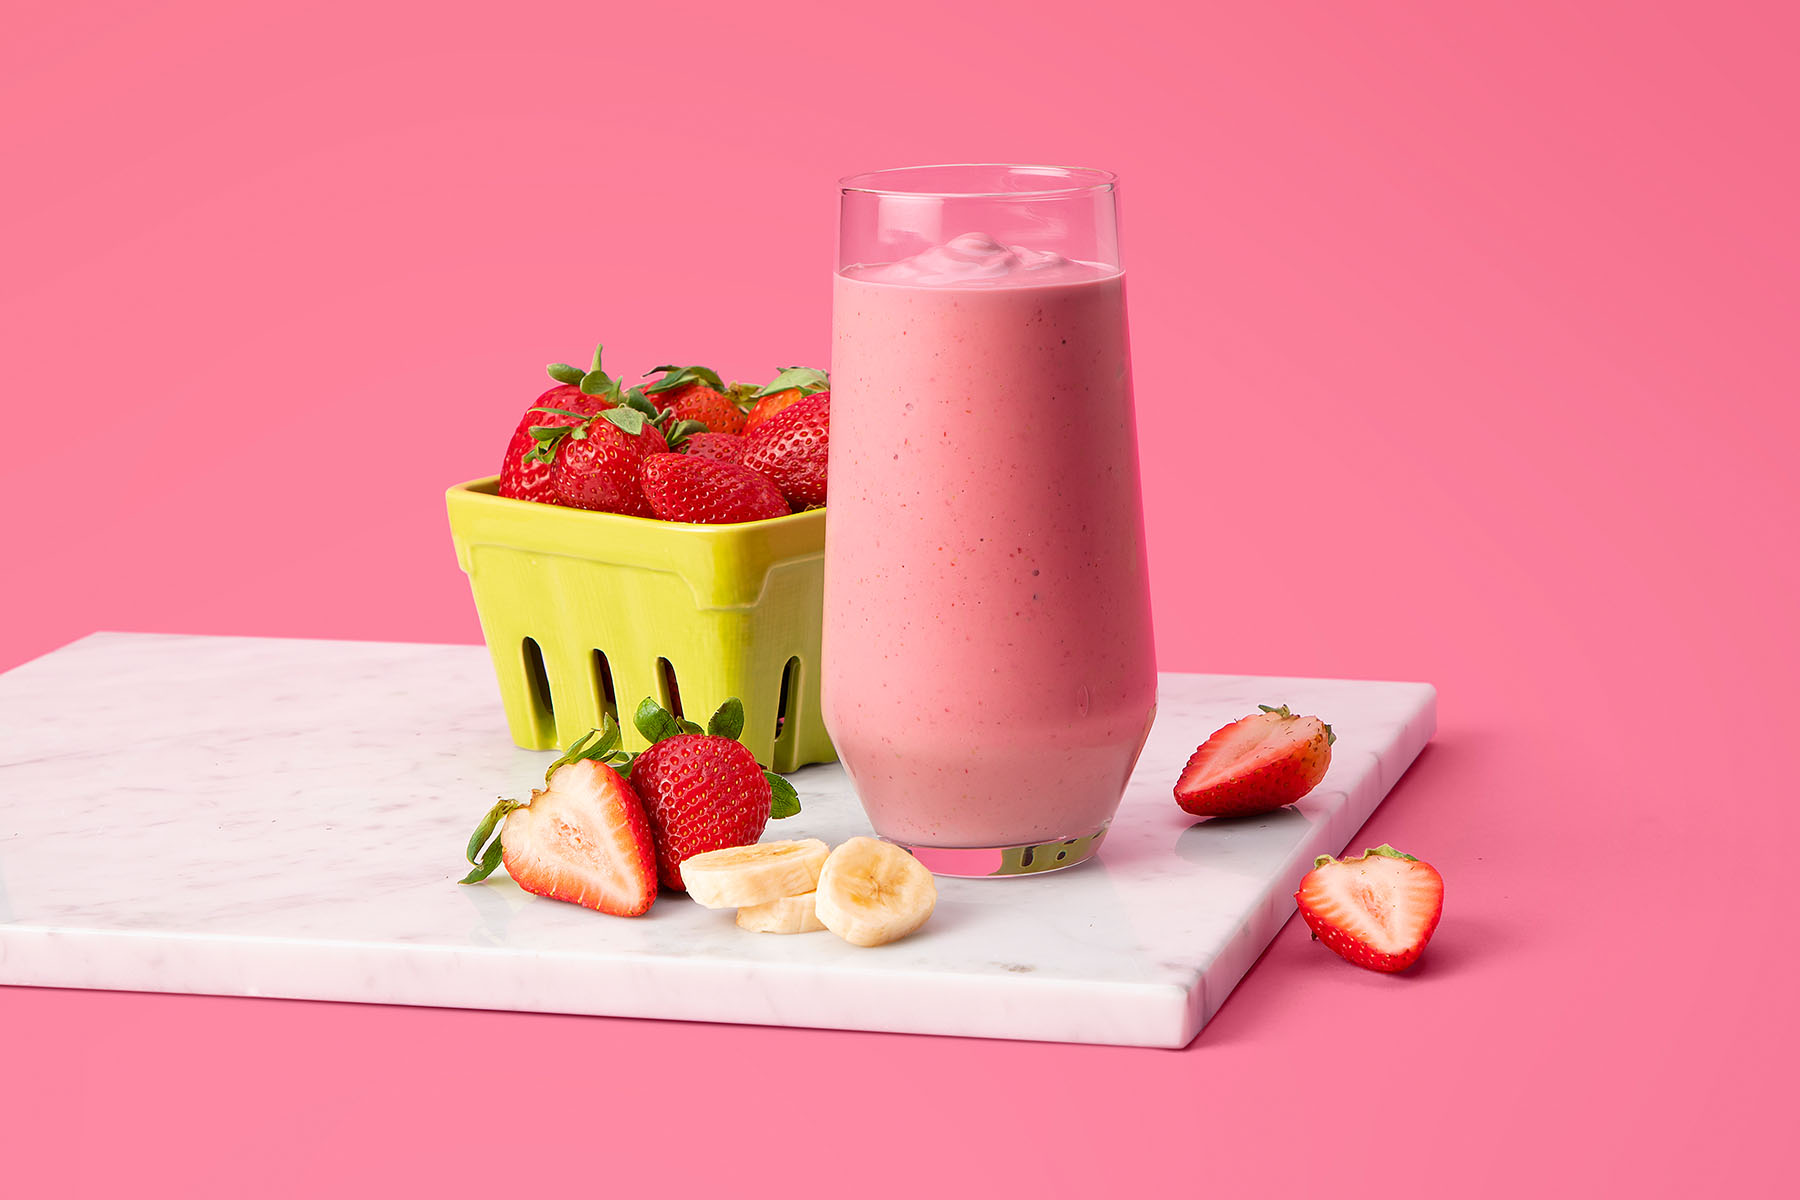 Pink strawberry banana smoothie in a glass on a cutting board with sliced fresh strawberries and bananas